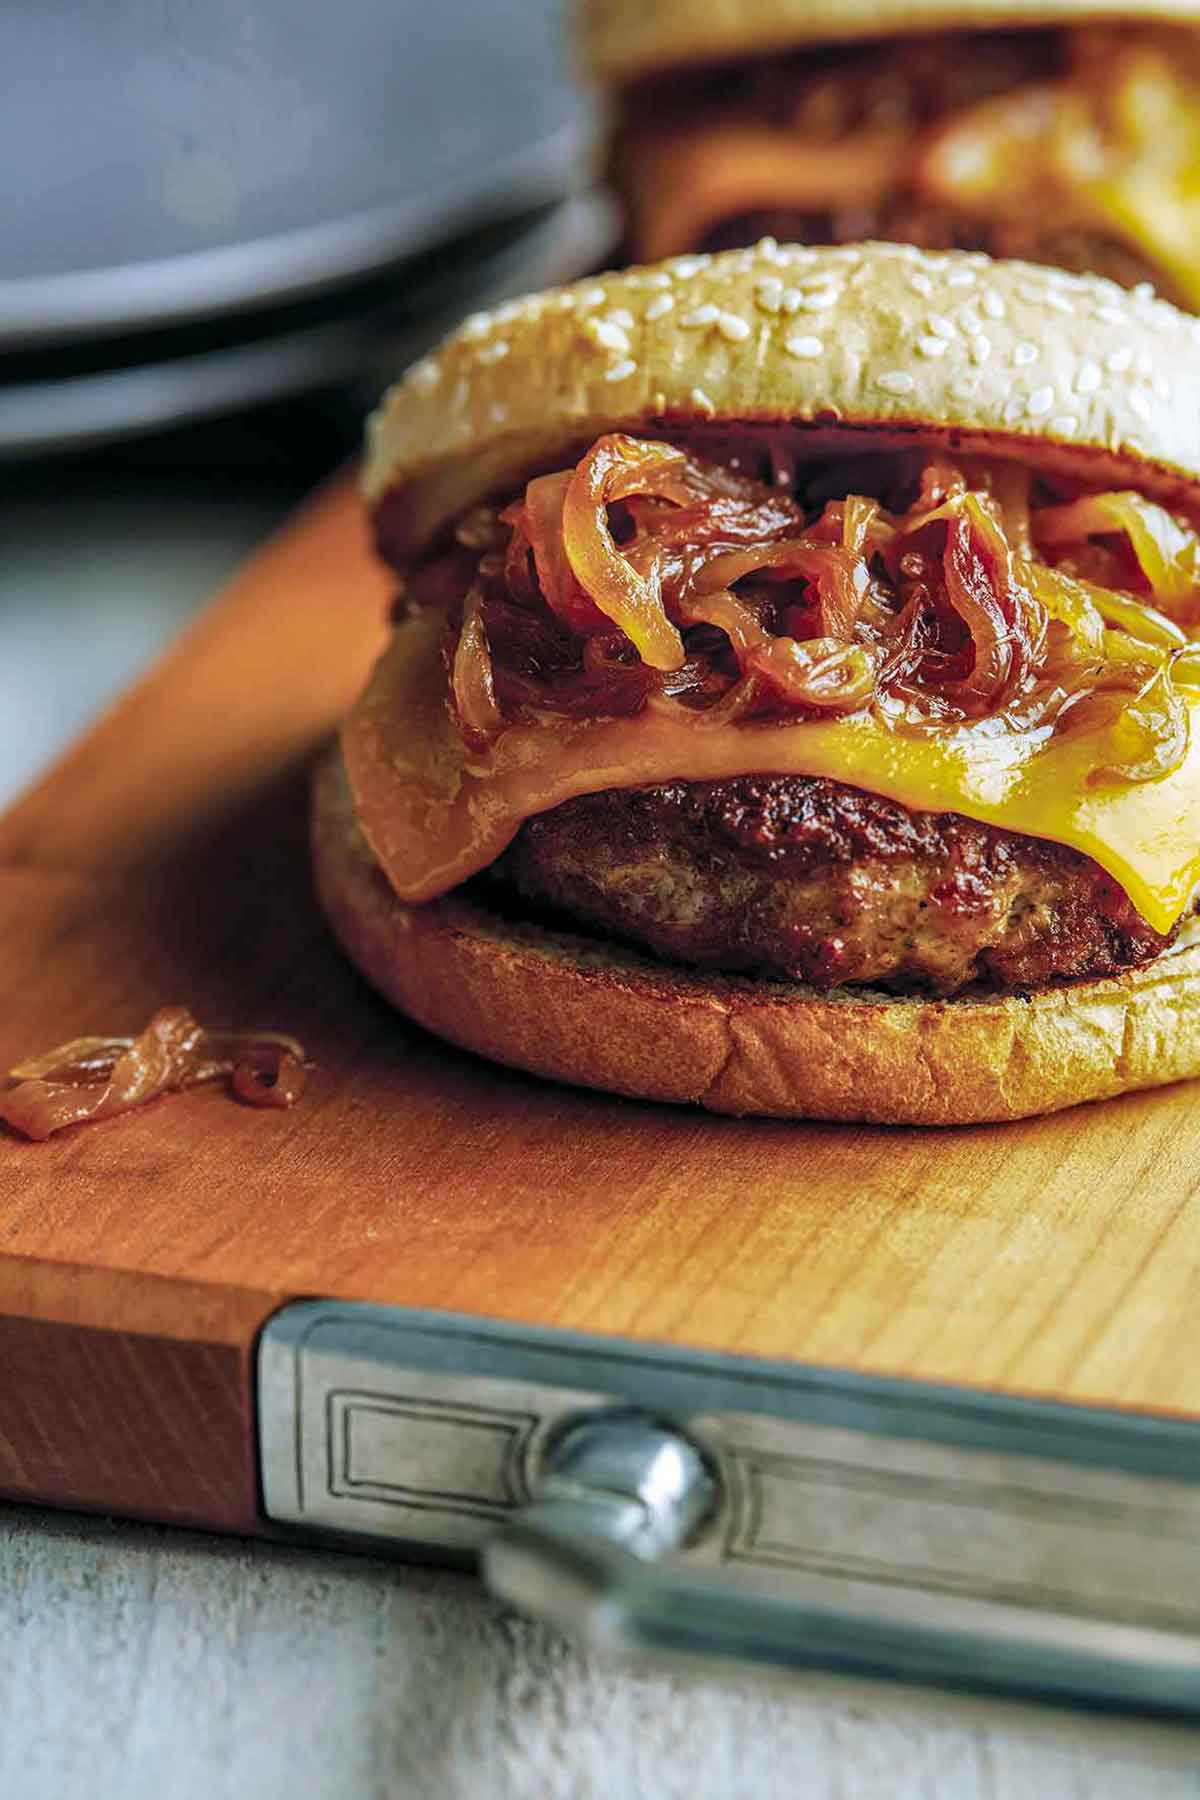 A turkey burger with maple caramelized onions and cheese on a wooden cutting board.